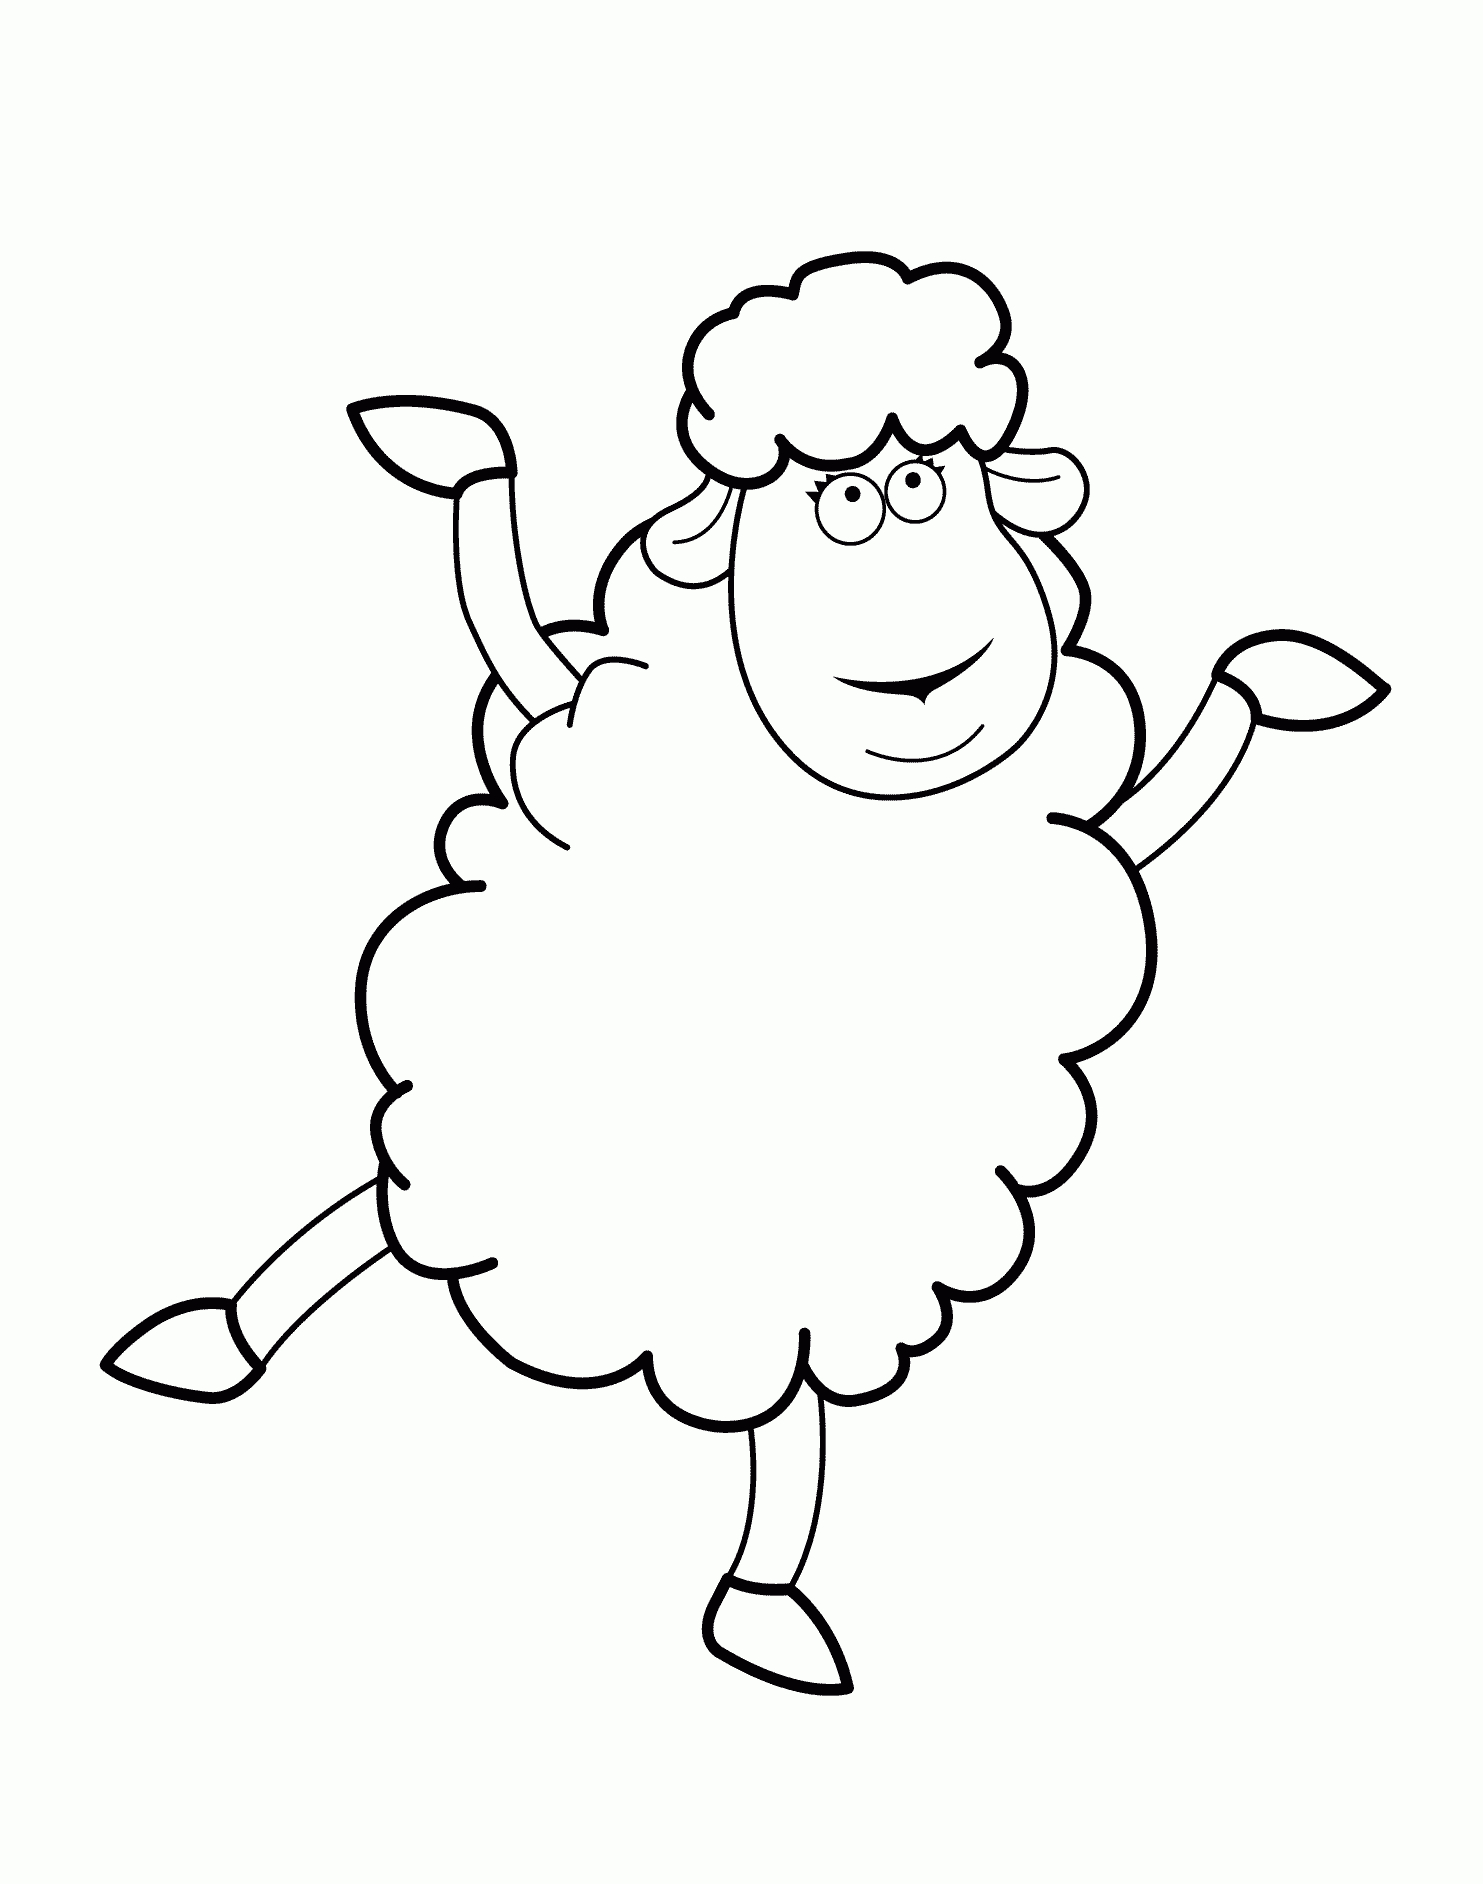 Funny Sheep Cartoon Animals Coloring Pages For Kids, Printable Free - Free Printable Pictures Of Sheep